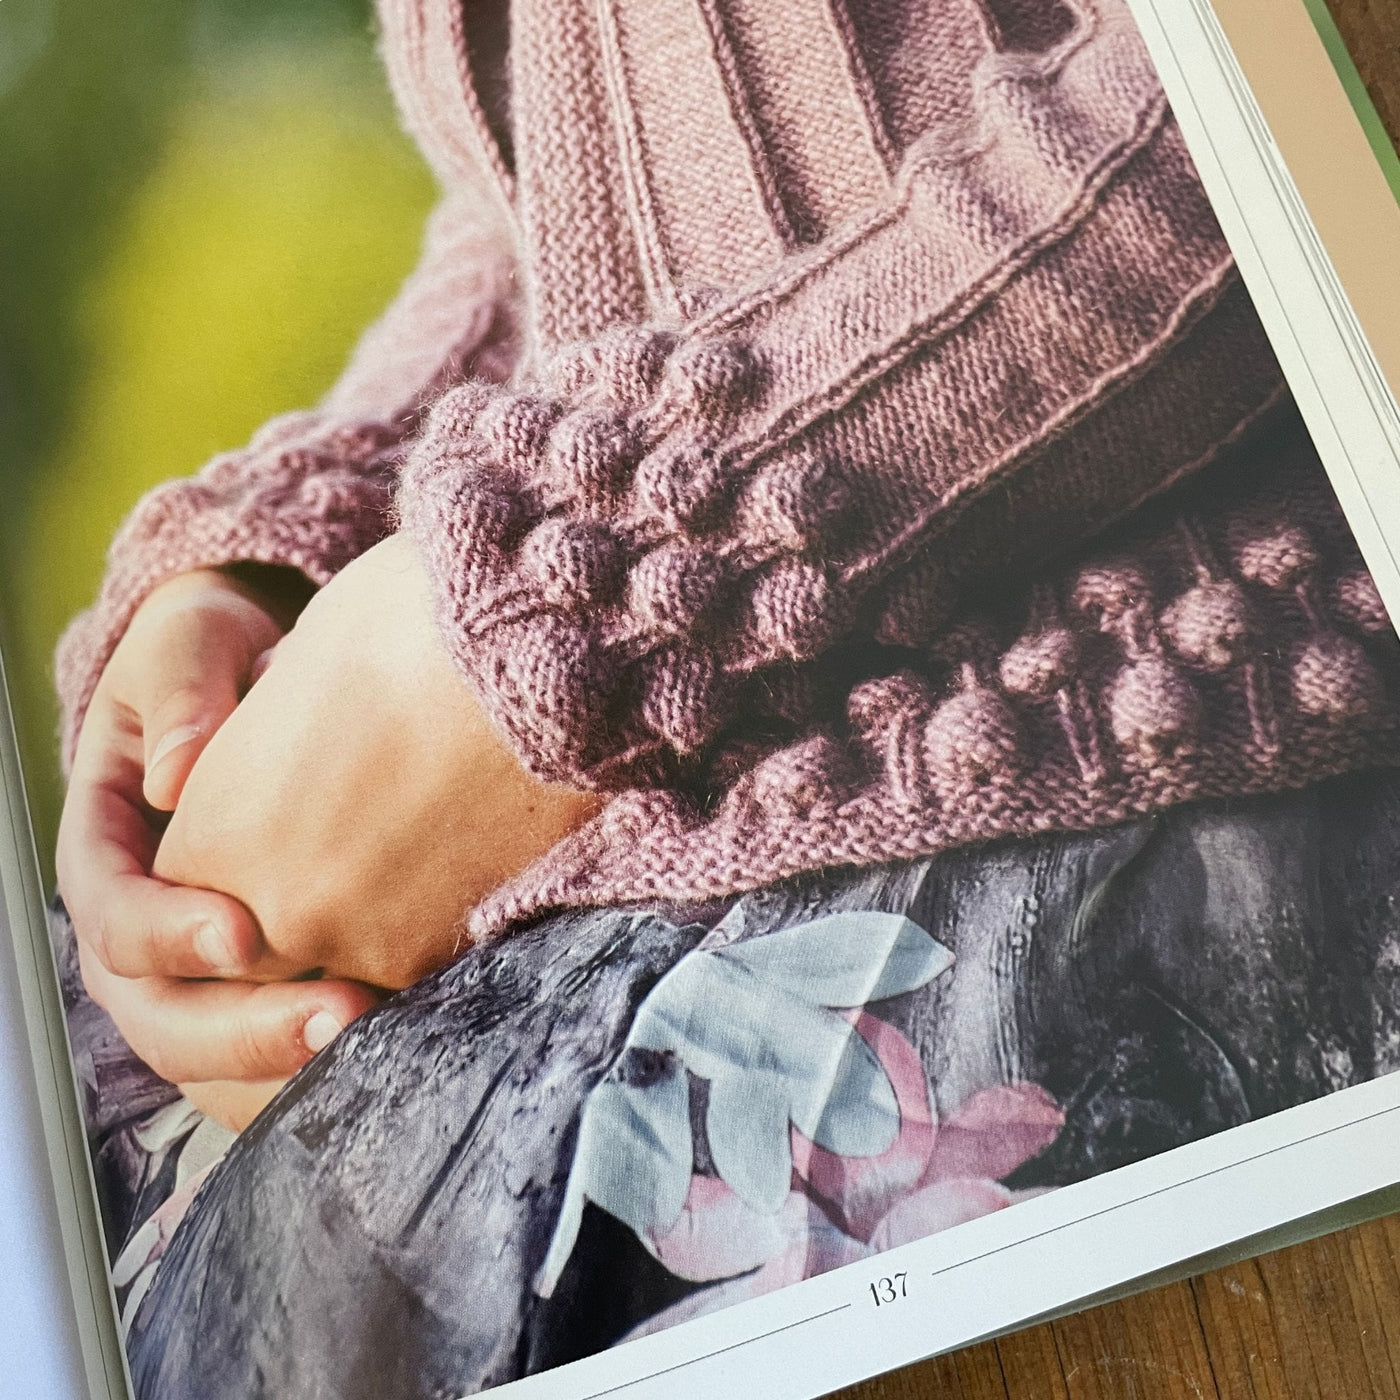 Inside pages of book Norwegian Sweaters & Jackets by Kari Hestnes shows close up of pattern detail texture and bauble on cuffs and hem of mauve sweater.